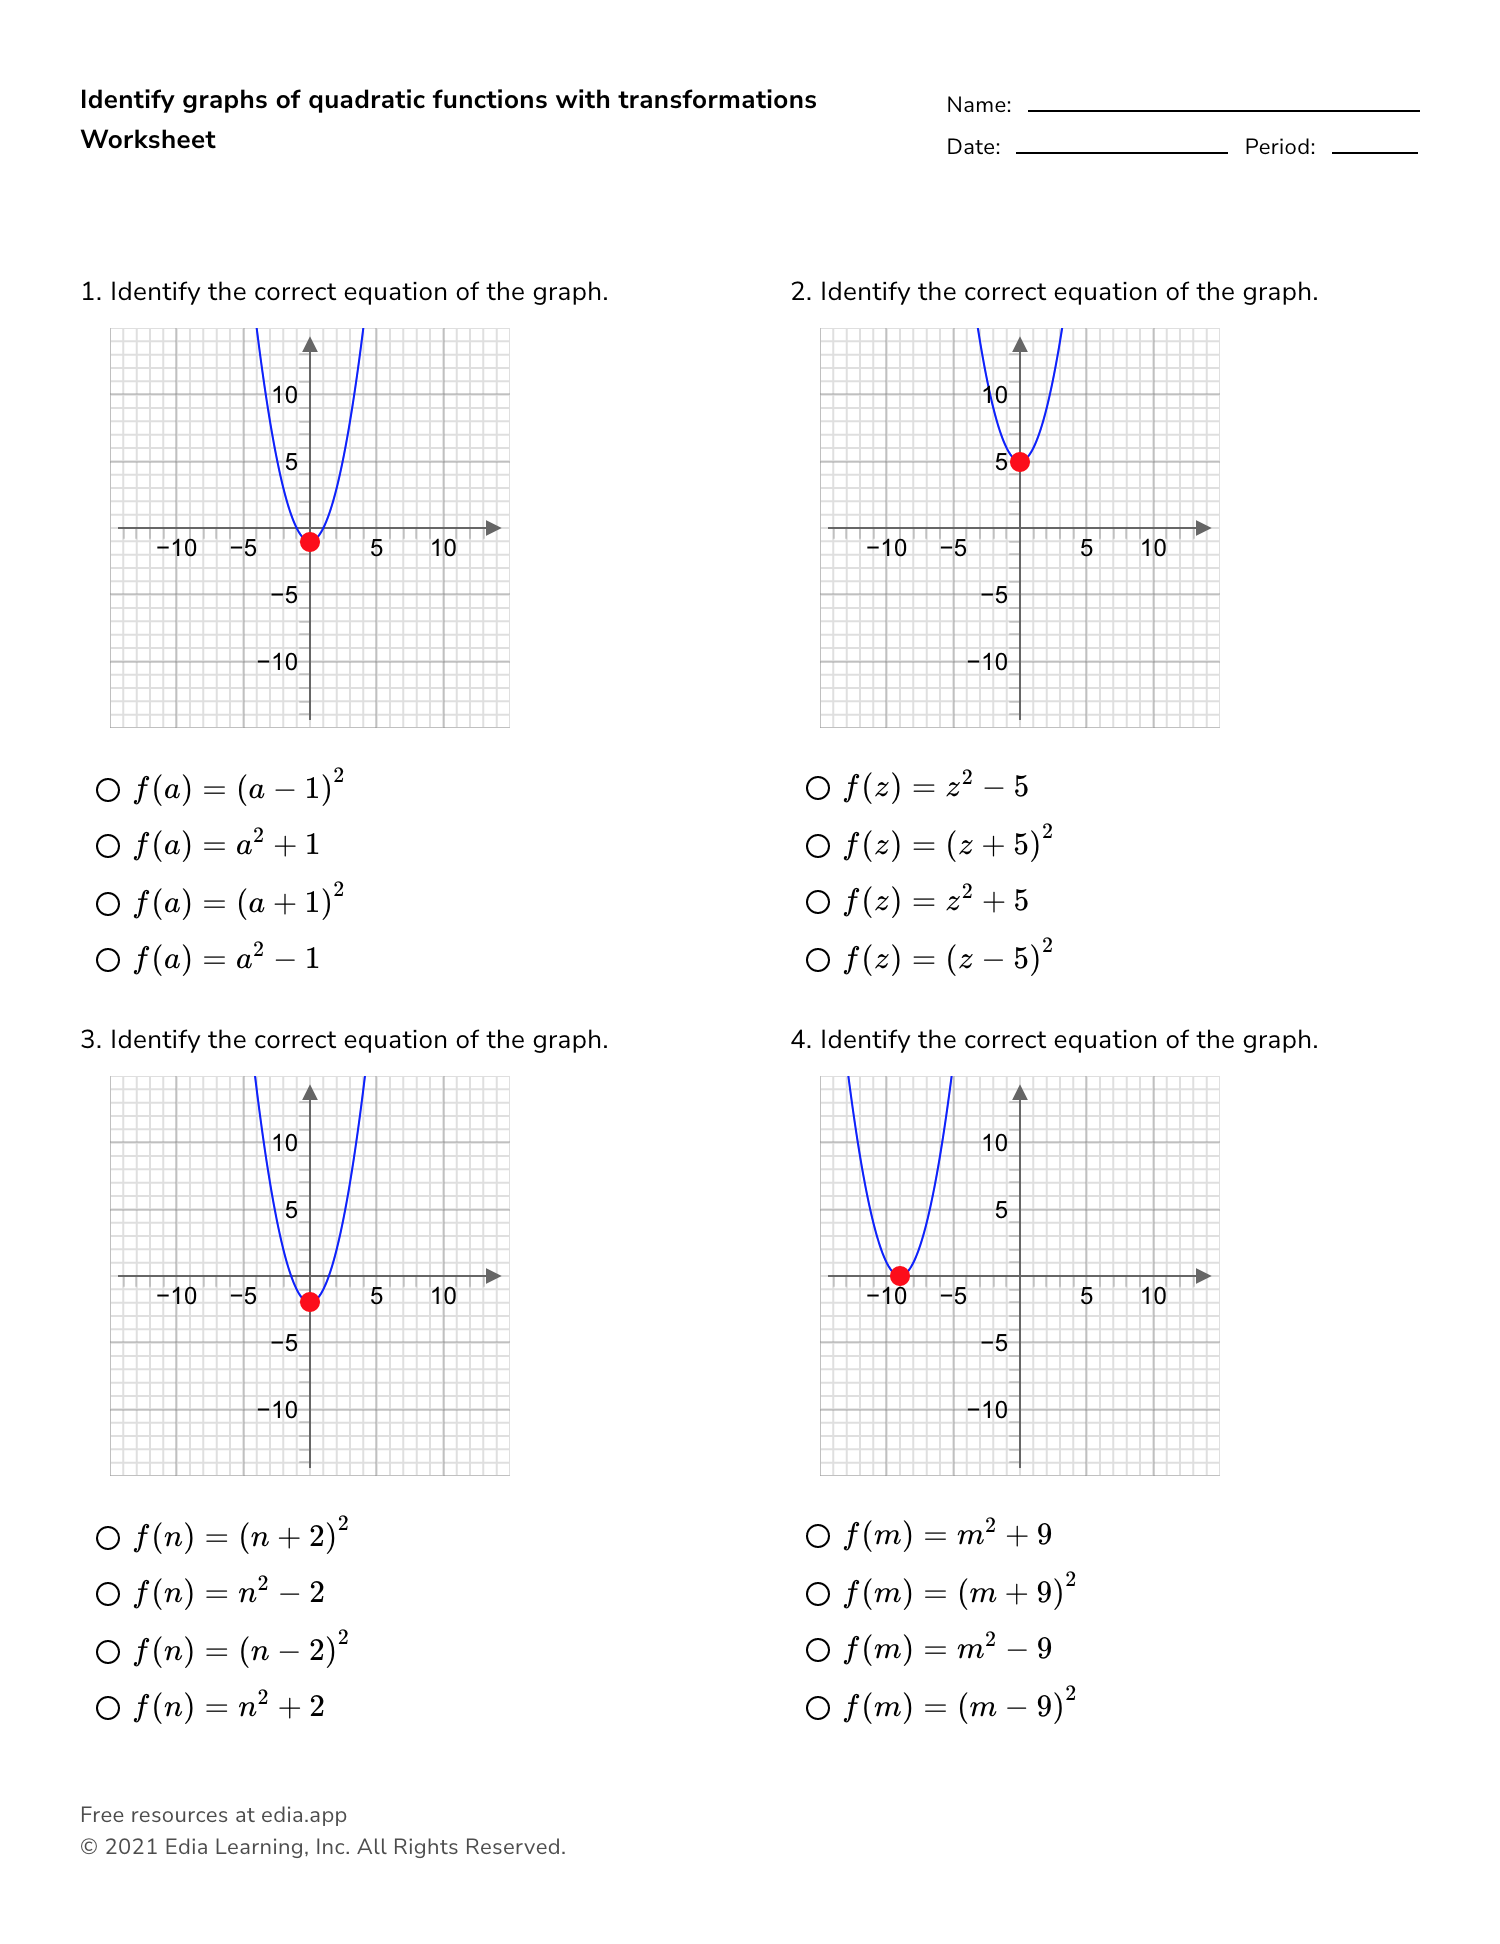 Identify Graphs Of Quadratic Functions With Transformations For Transformations Of Functions Worksheet